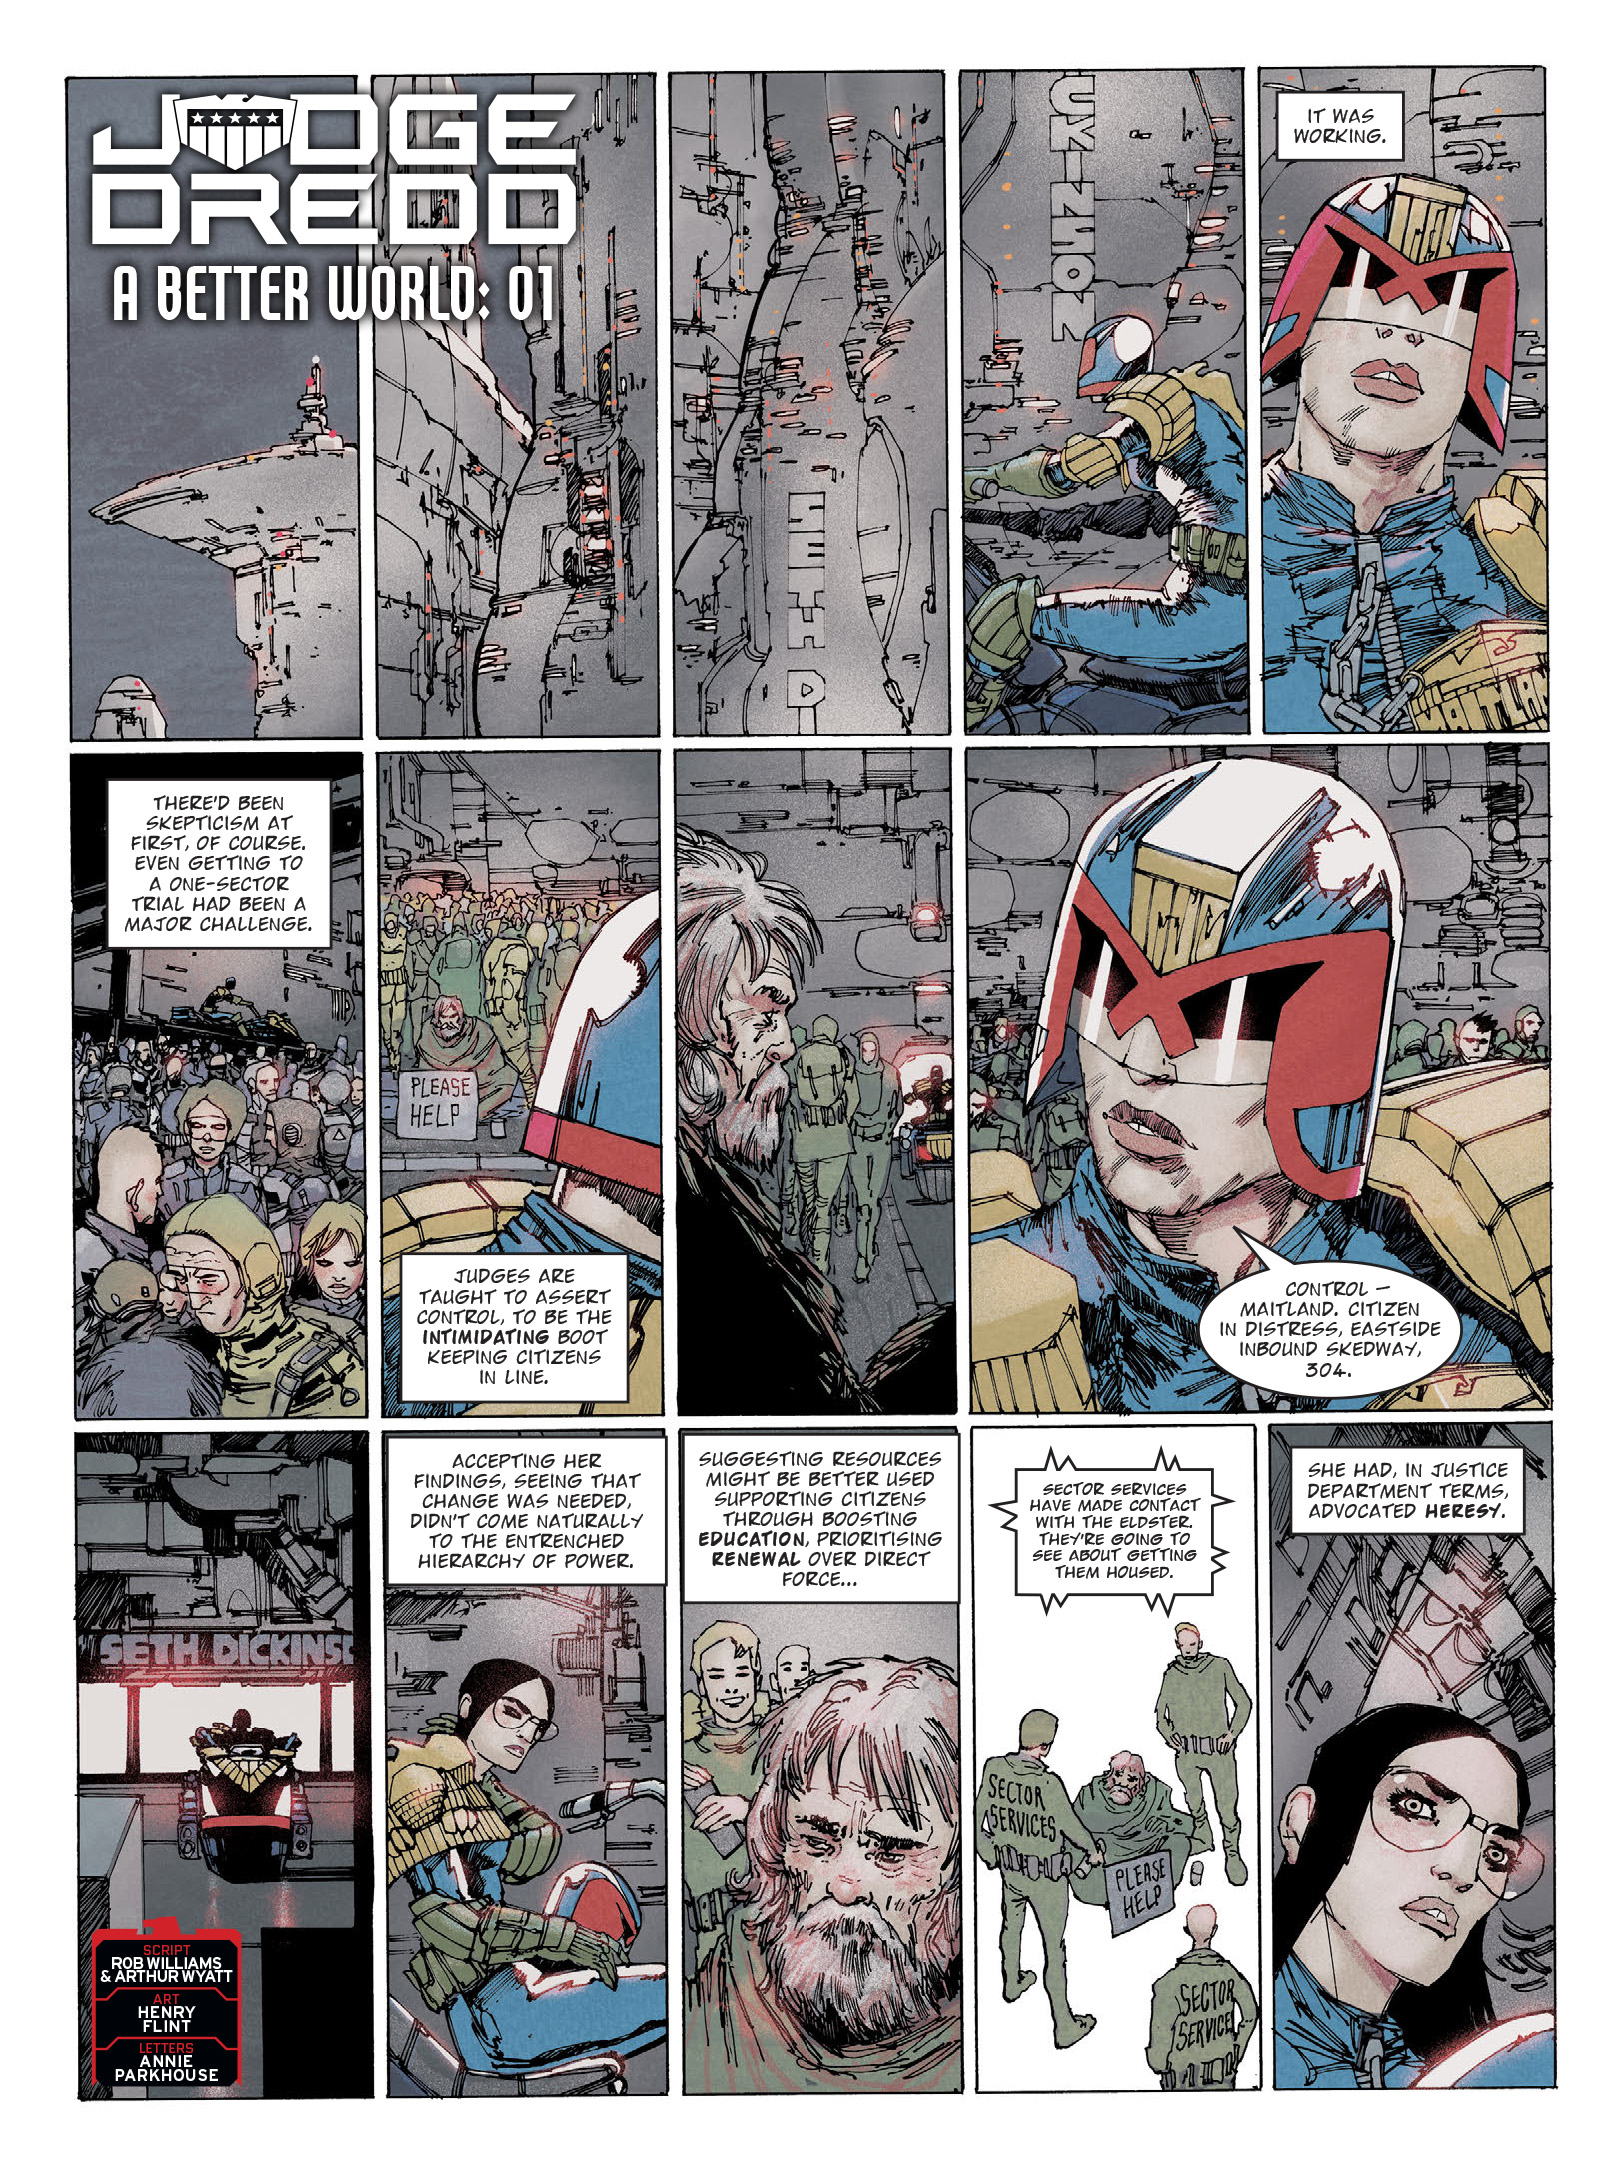 2000 AD: Chapter 2364 - Page 3